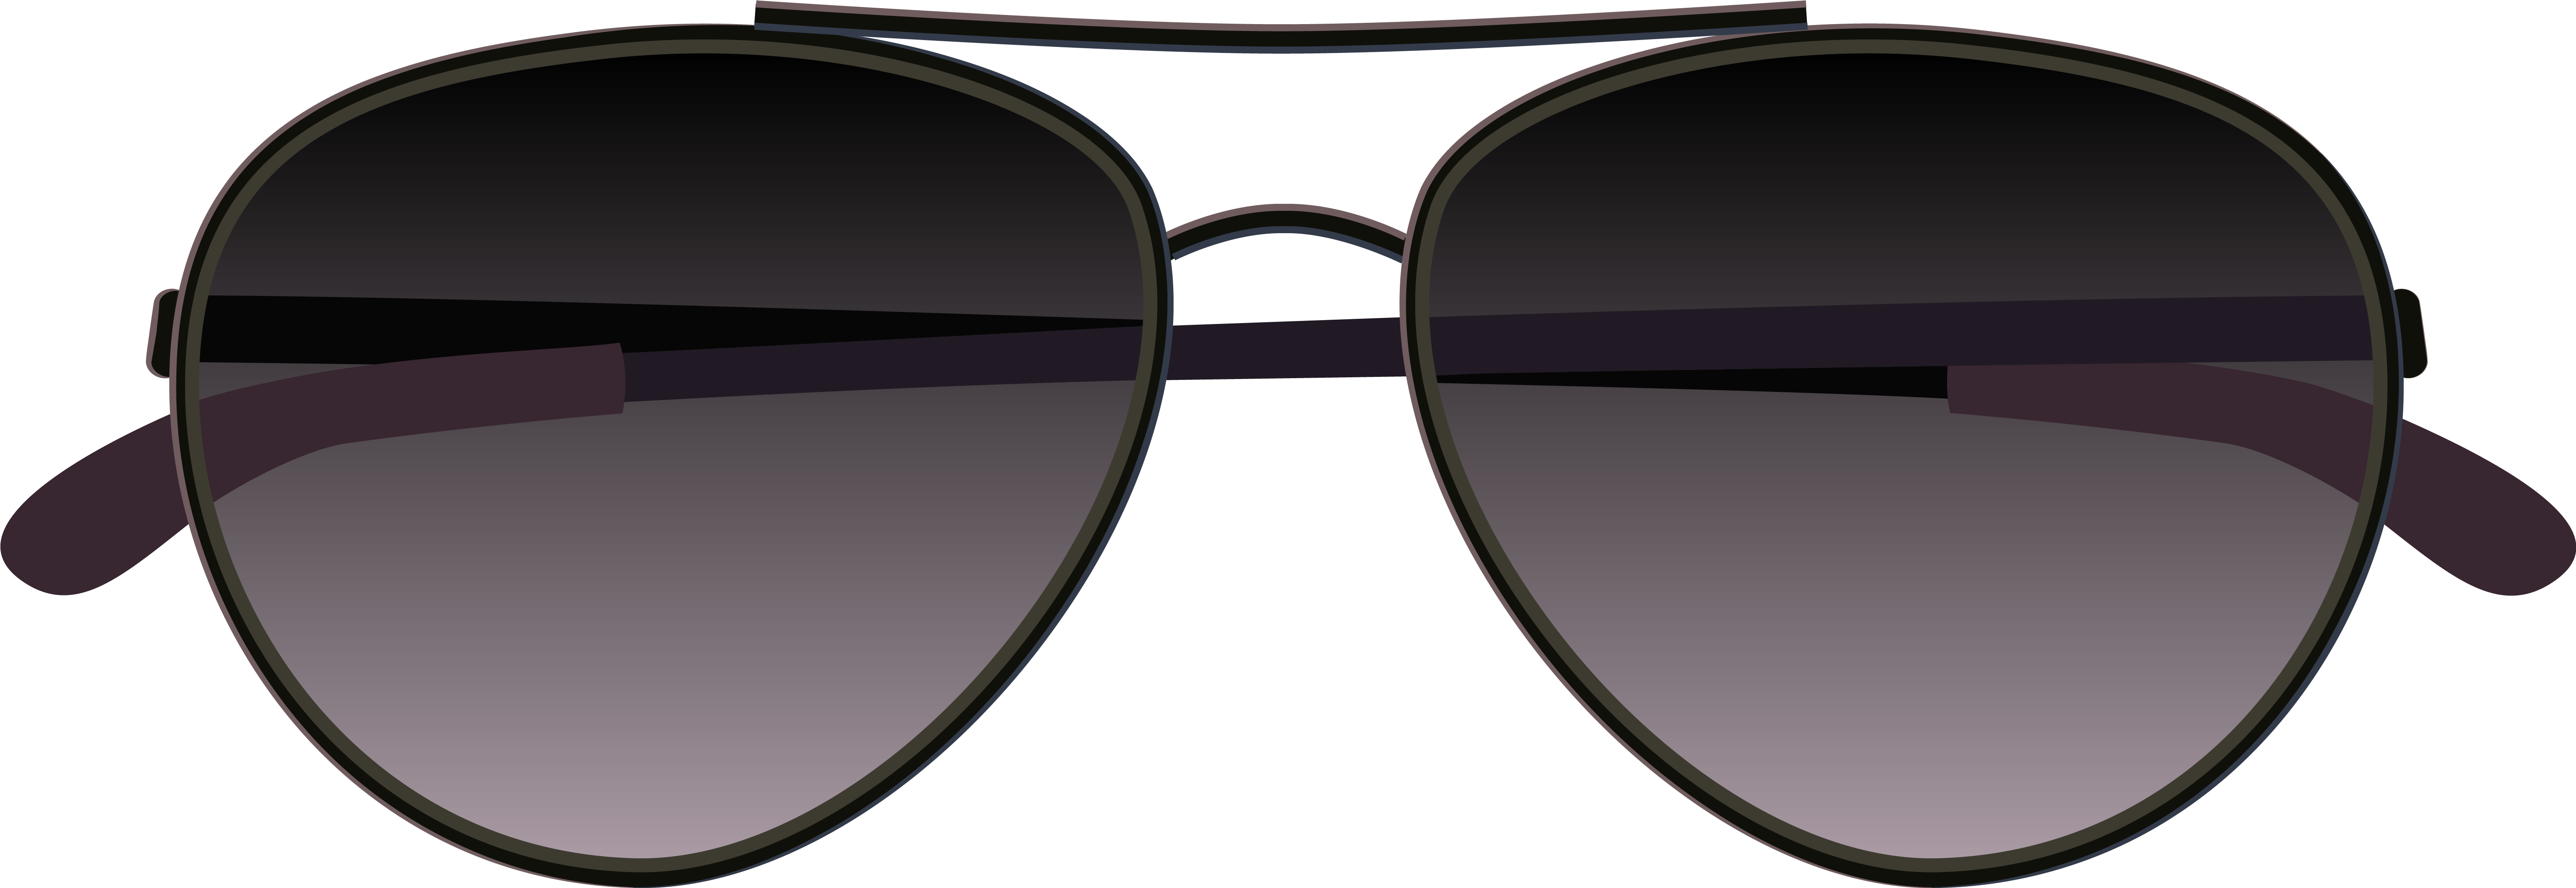 deal with it sunglasses png.